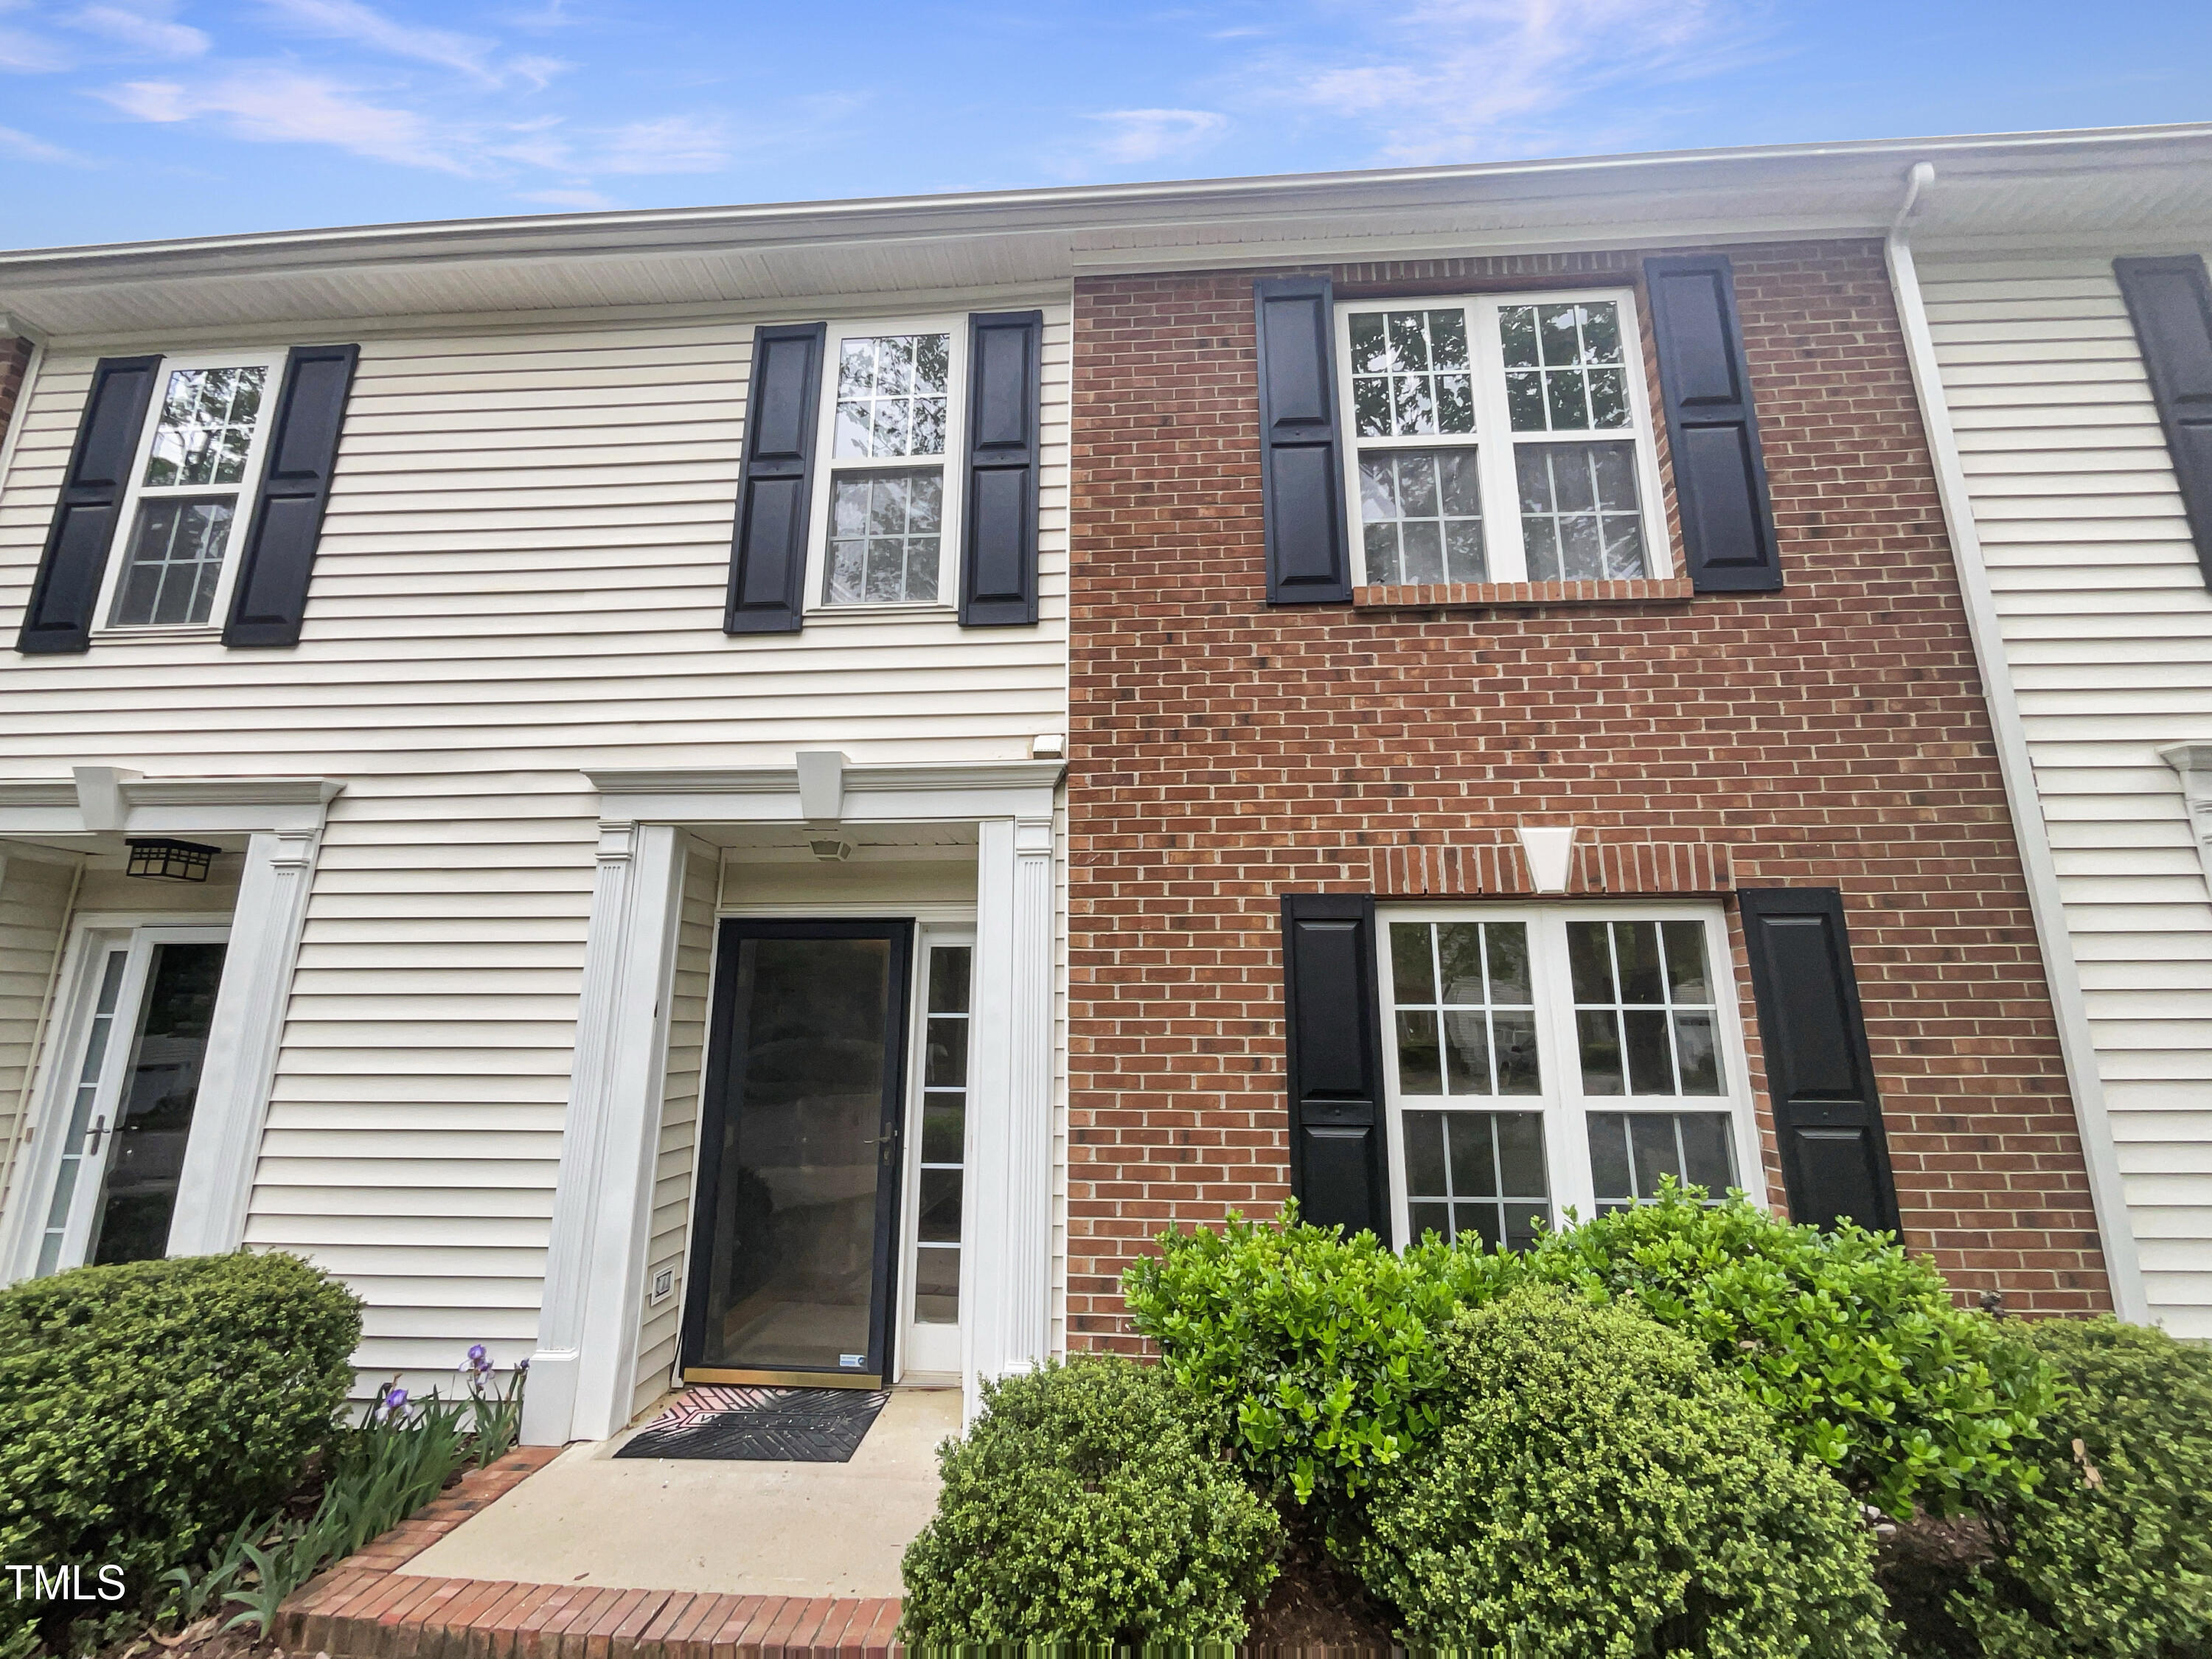 Photo 1 of 16 of 3102 Coxindale Drive townhome